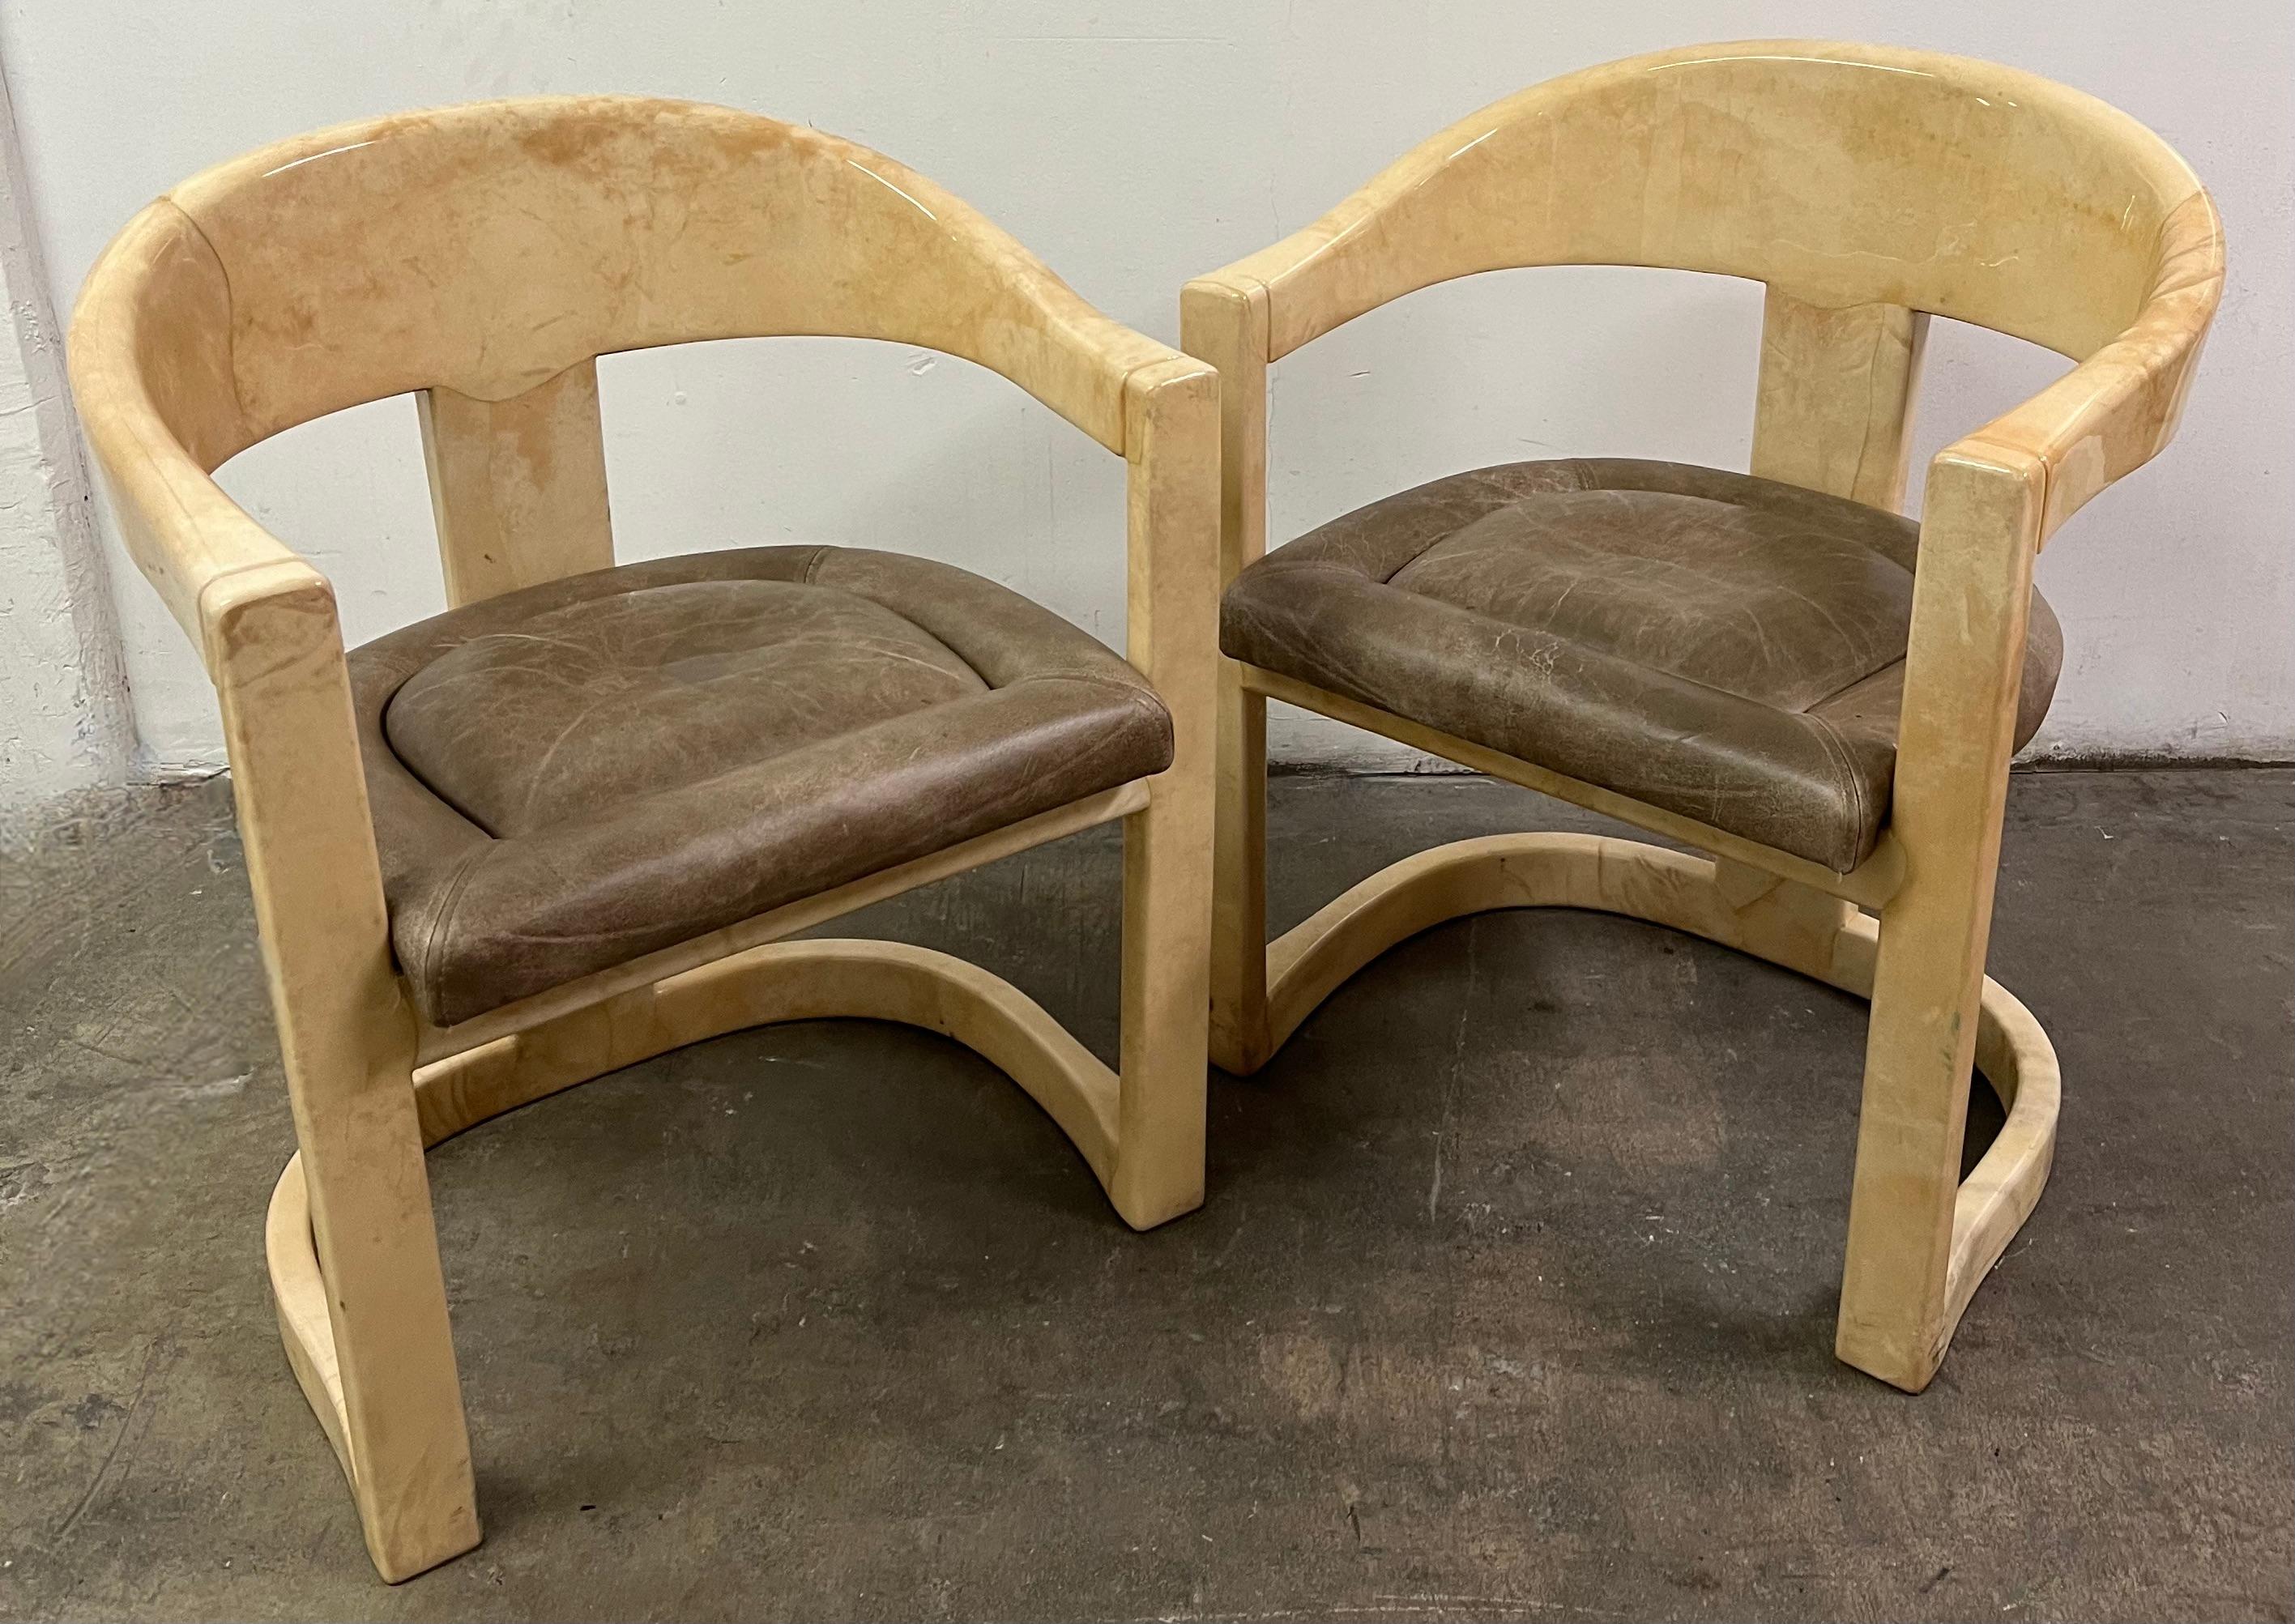 Pair of Karl Springer Goatskin Onassis Chairs with Leather Upholstered Seats For Sale 4